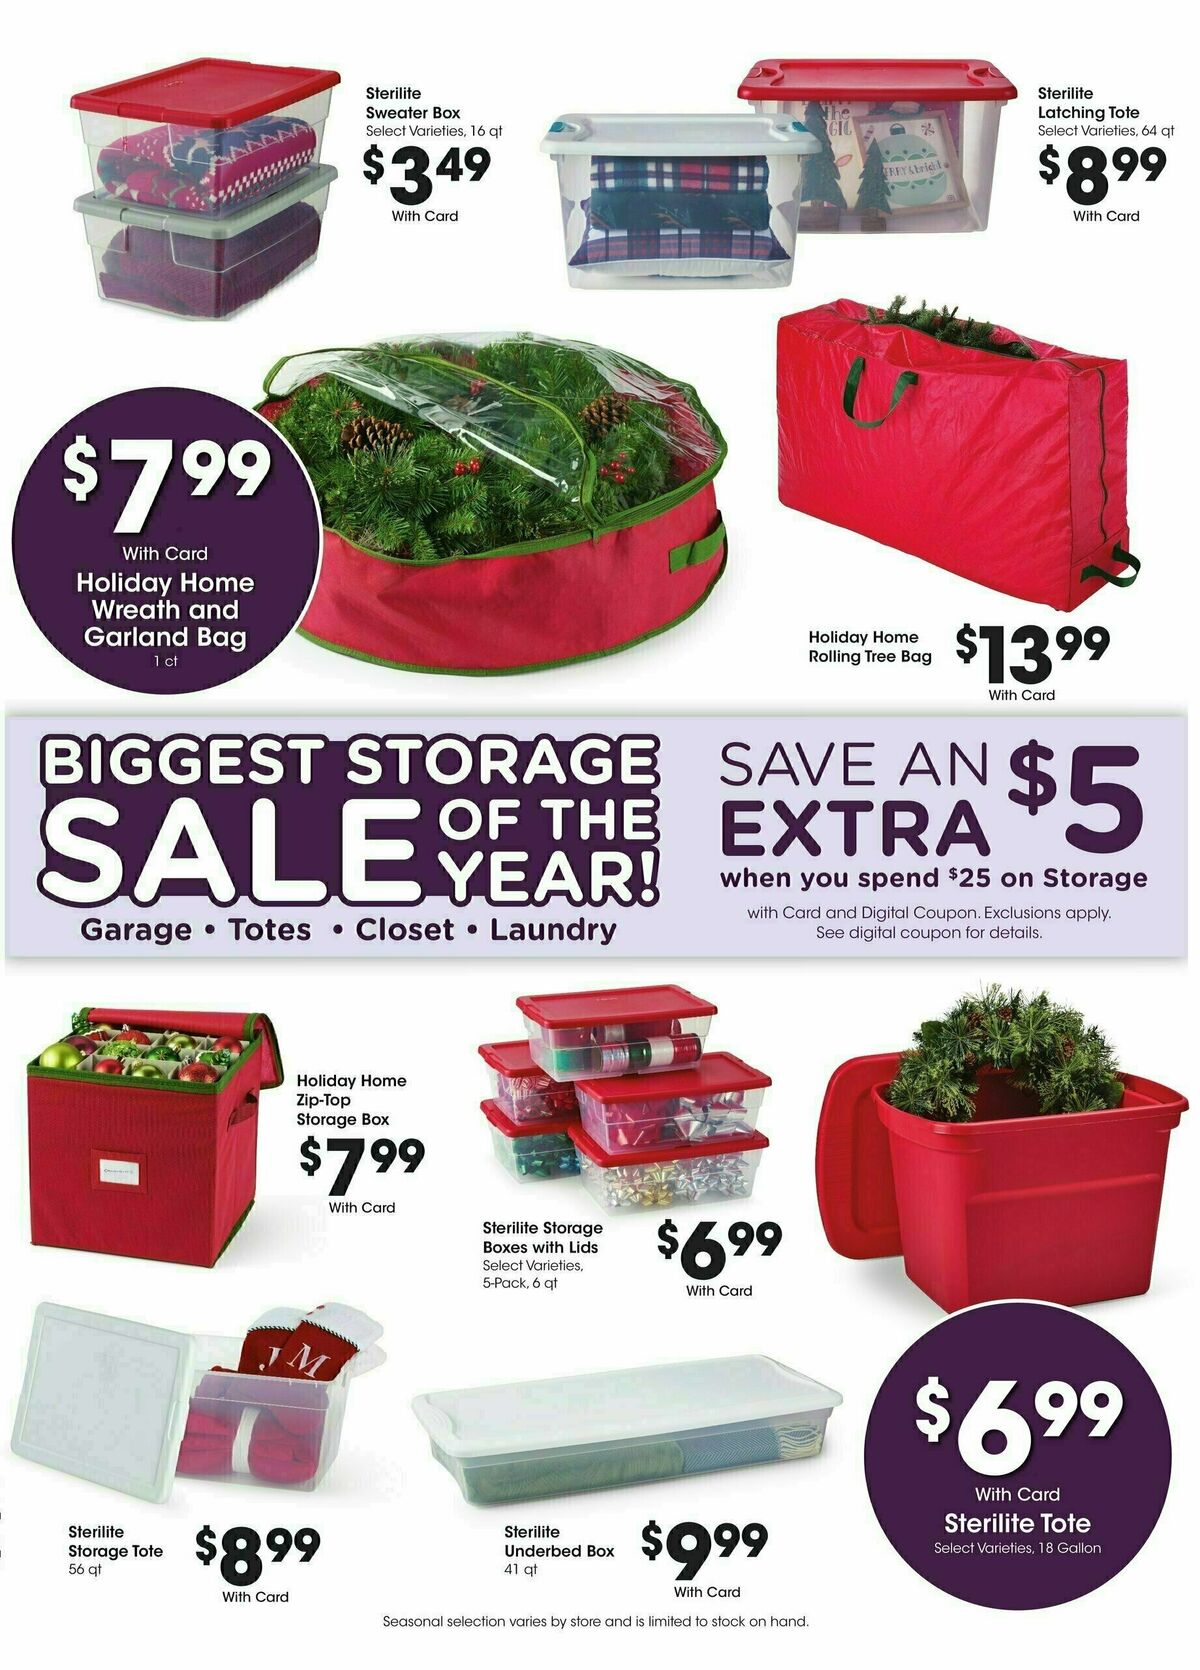 King Soopers Weekly Ad from December 27